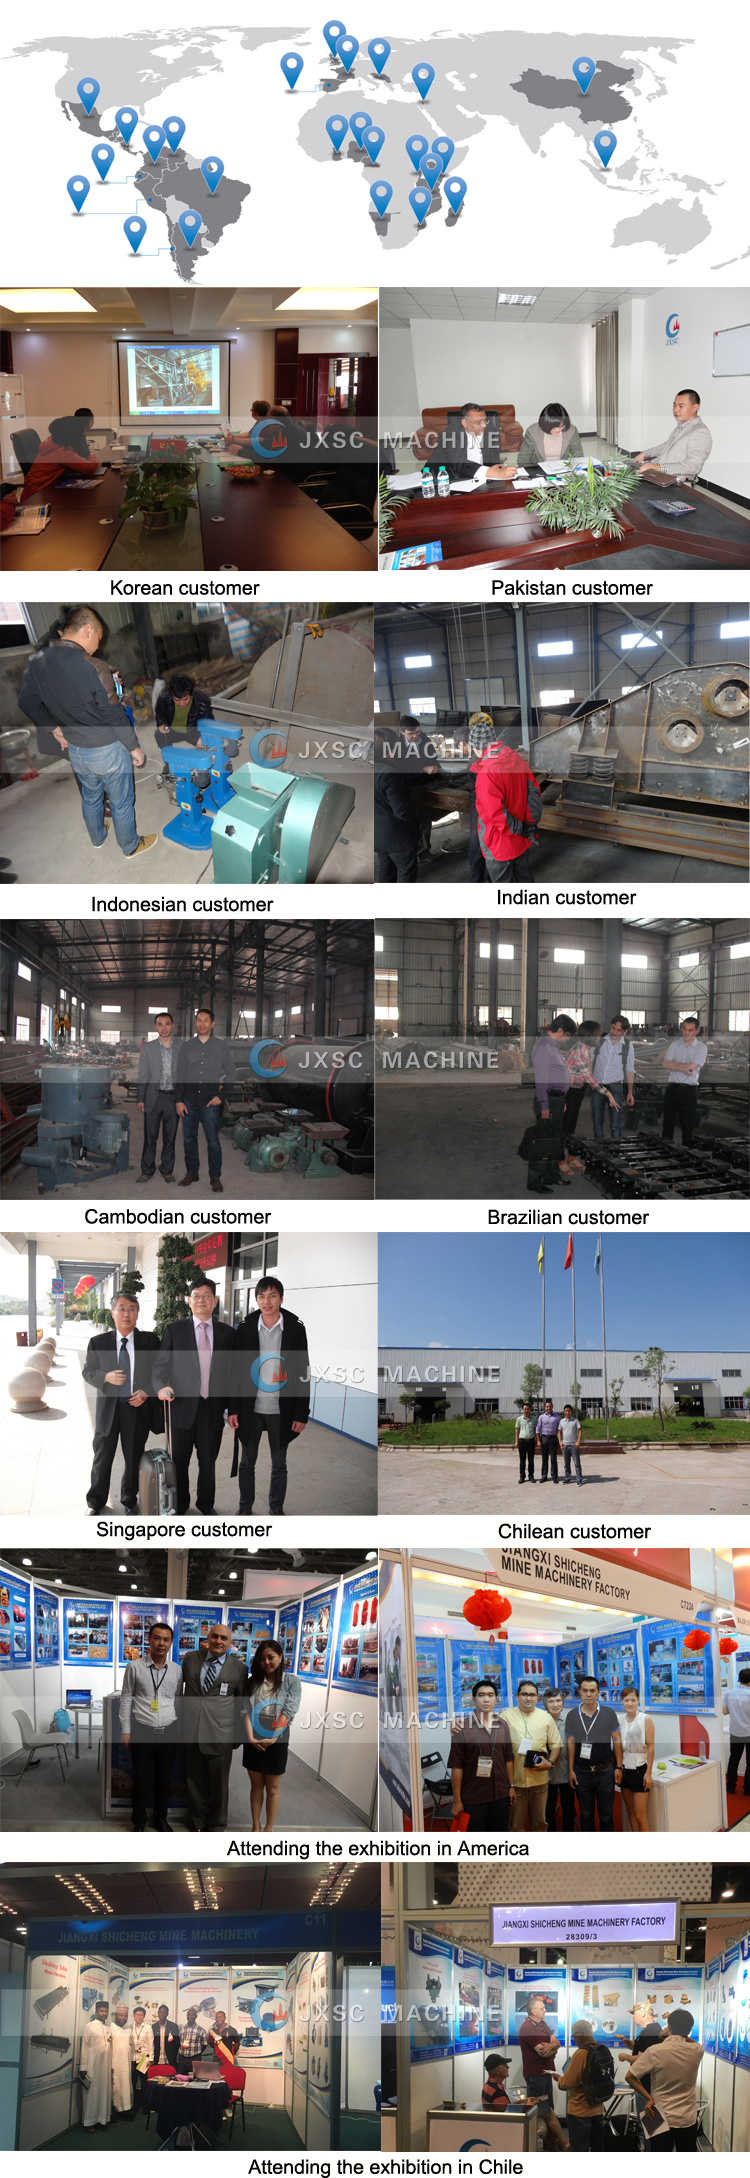 Small Capacity Gold Recovery Centrifugal Concentrator From China Supplier